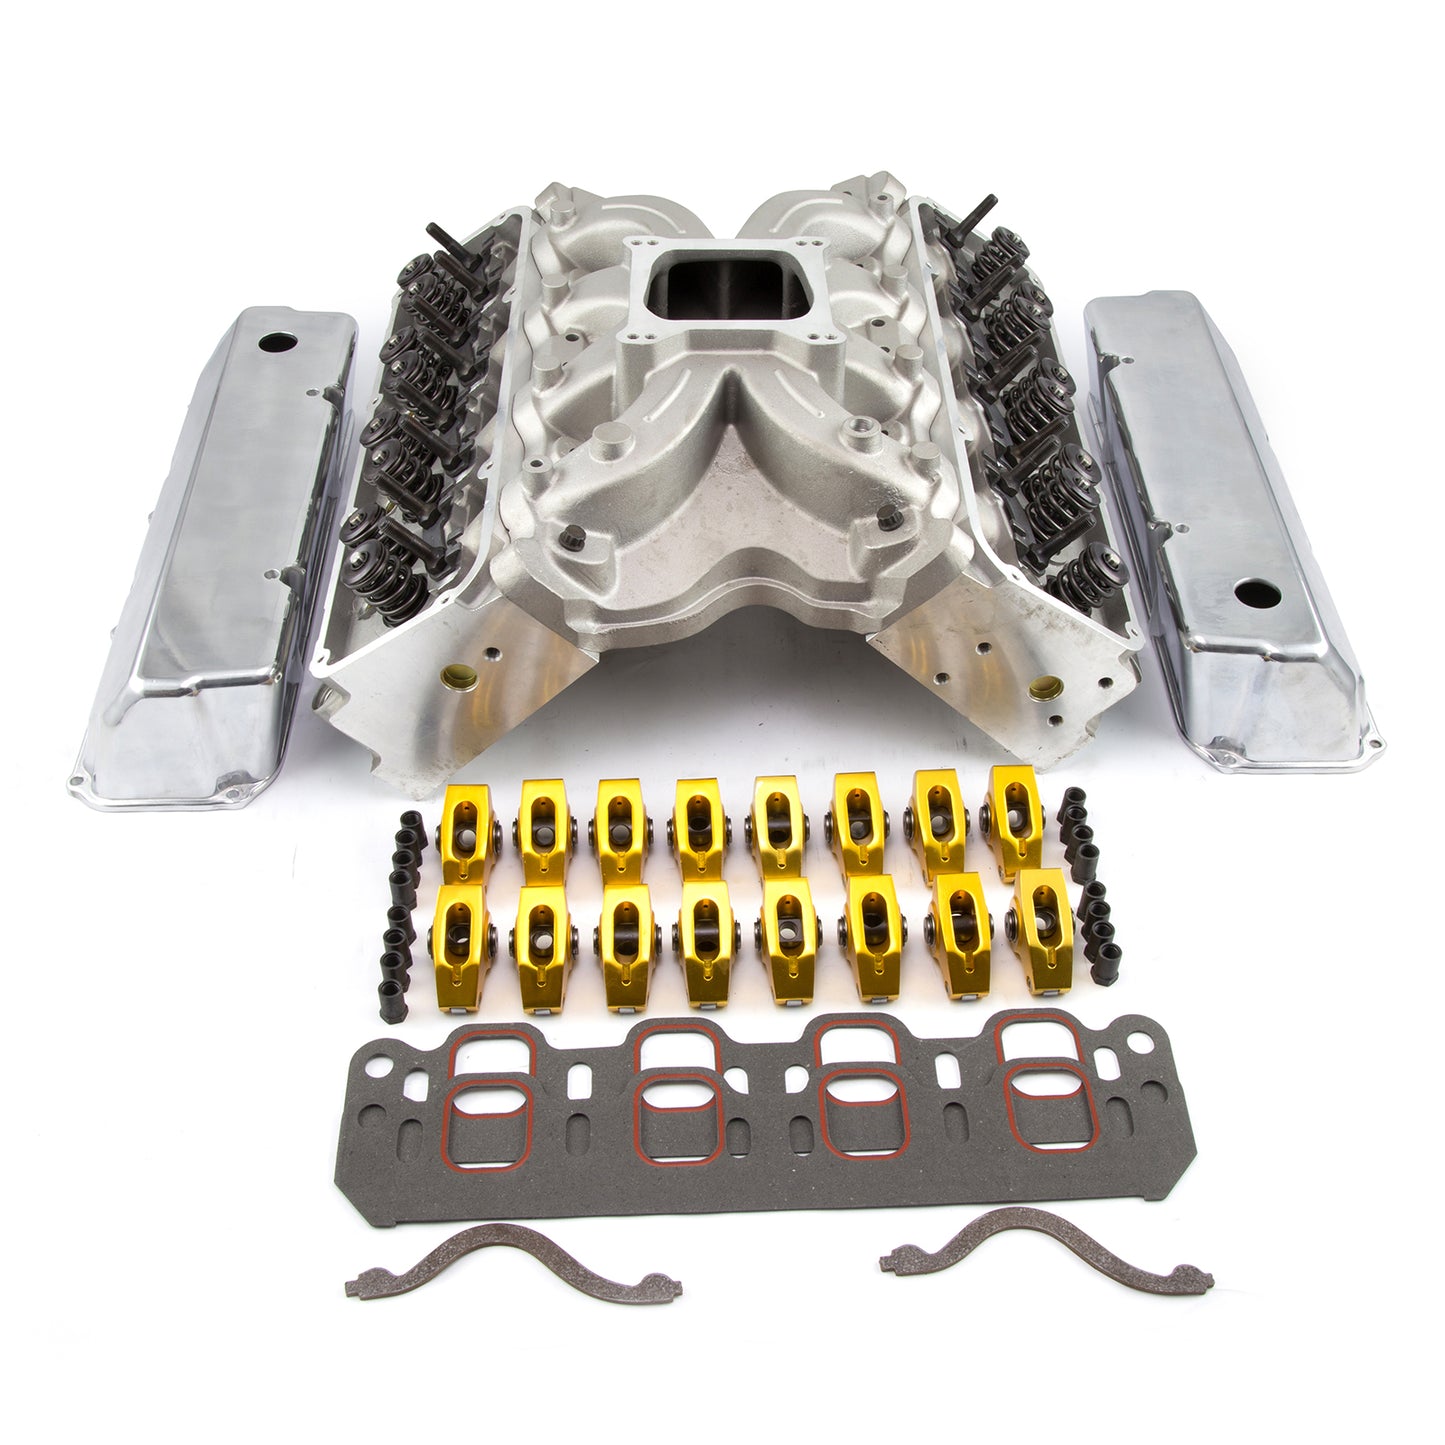 Speedmaster PCE435.1044 Fits Ford 302 351C Cleveland Hyd Roller CNC Cylinder Head Top End Engine Combo Kit